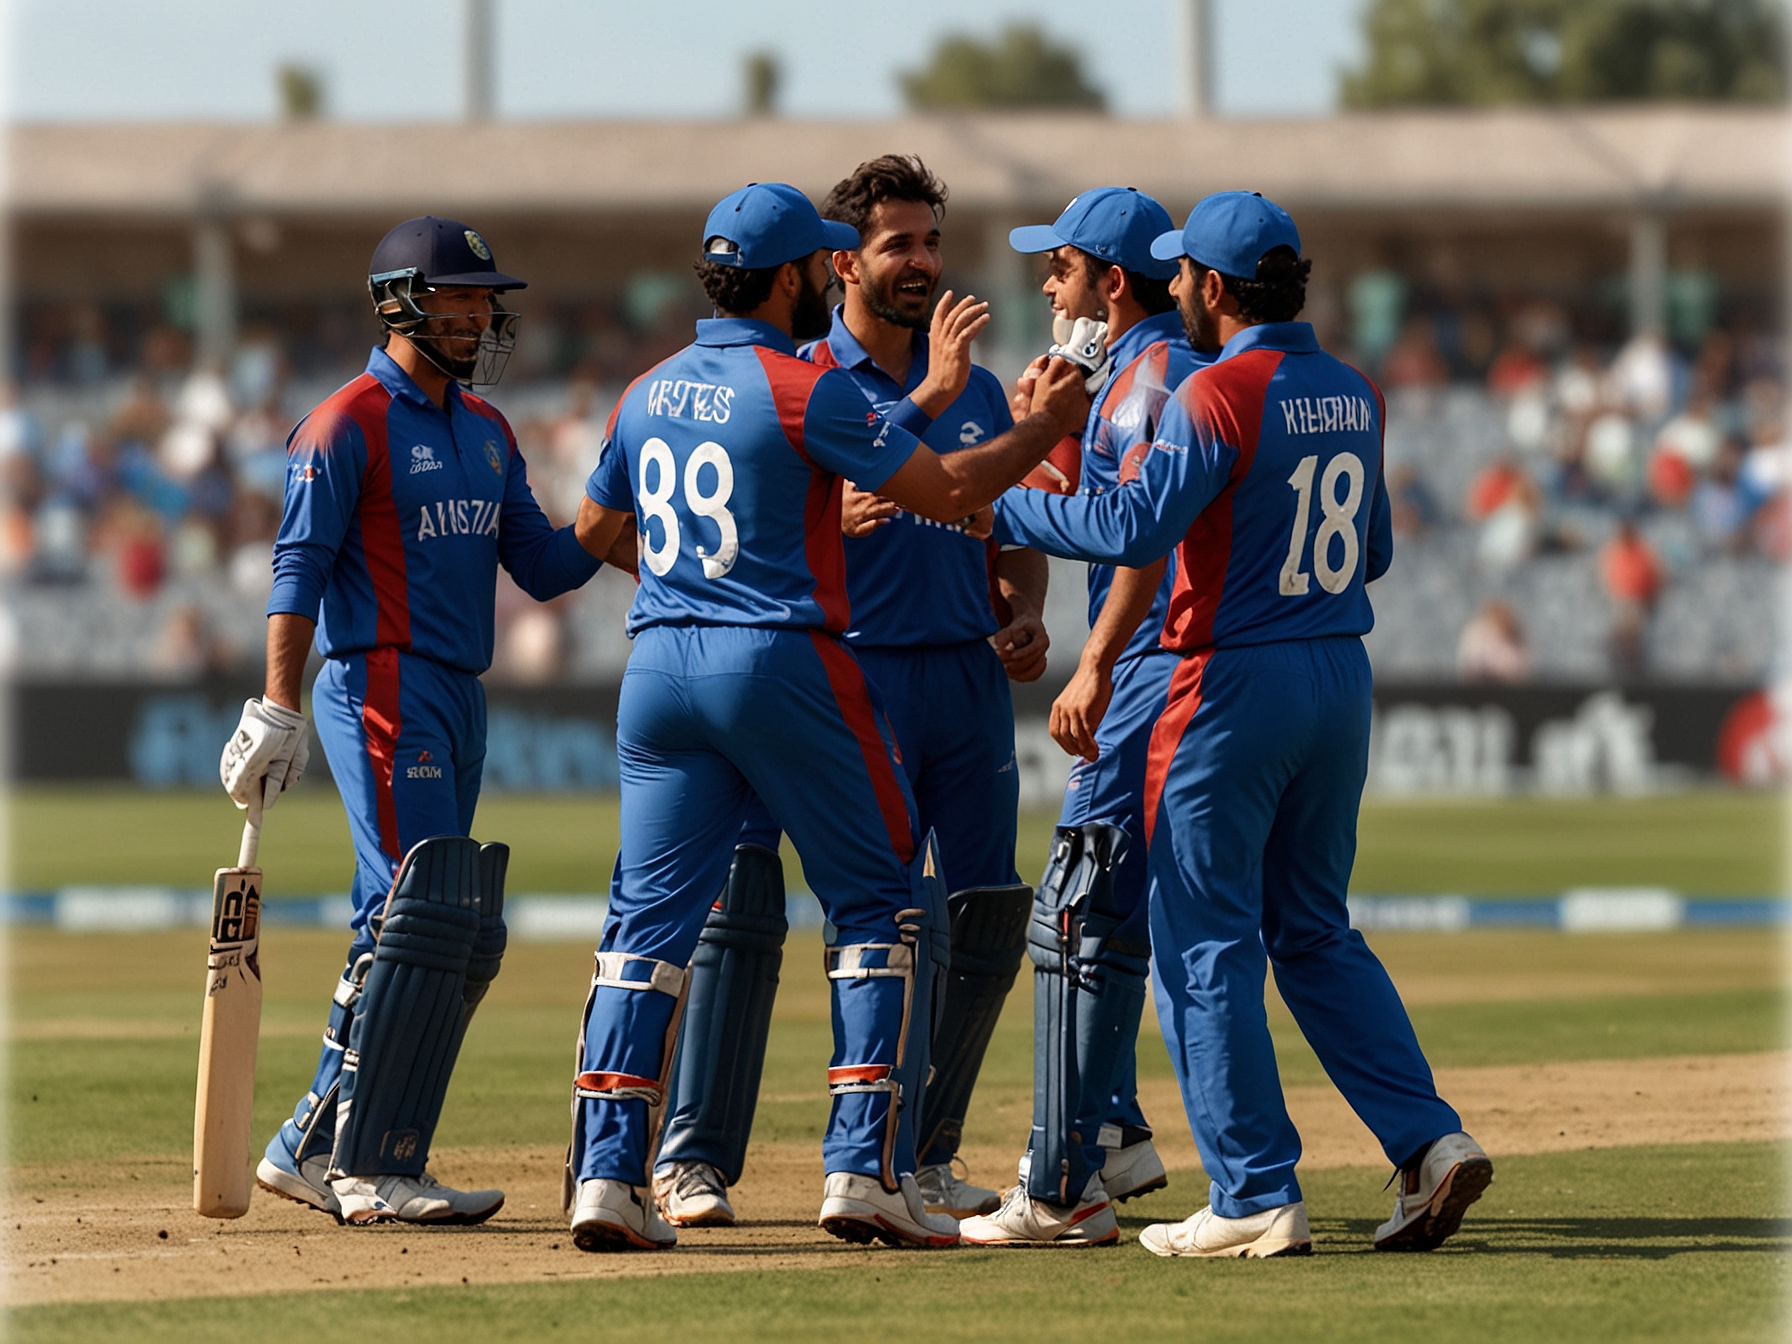 The Afghan cricket team celebrating a crucial wicket during their match against Australia in the 2023 ODI World Cup, showcasing their determination and skill on the international stage.